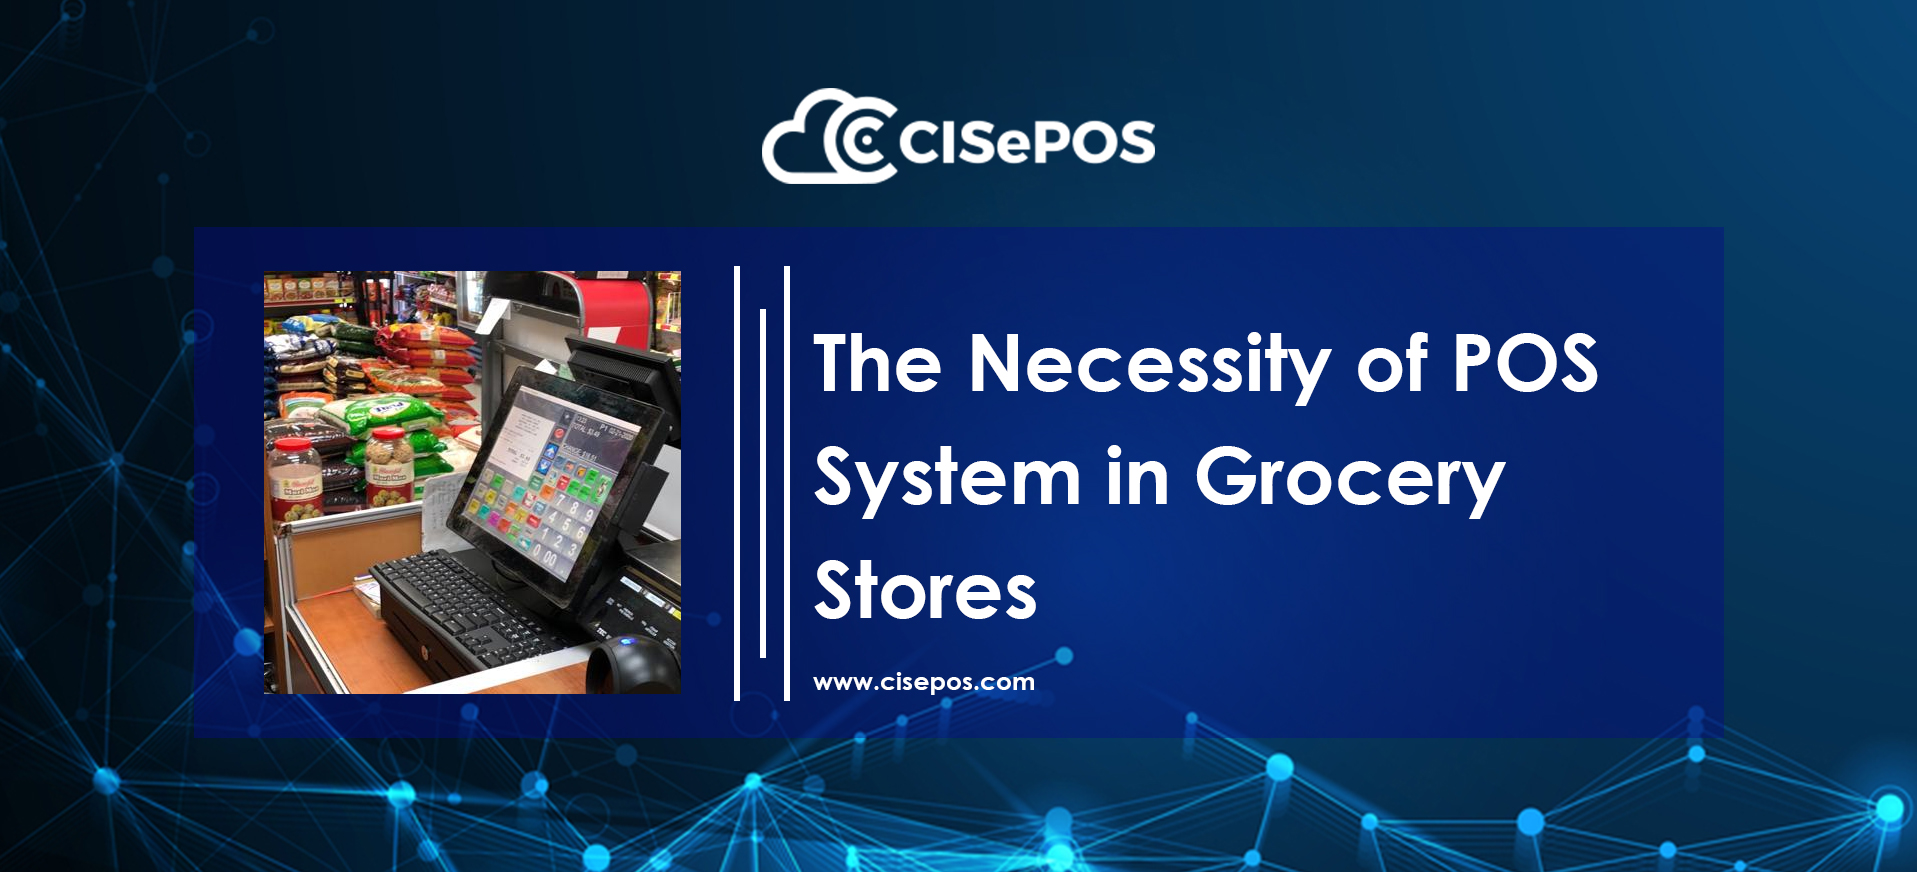 The Necessity of POS System in Grocery Stores